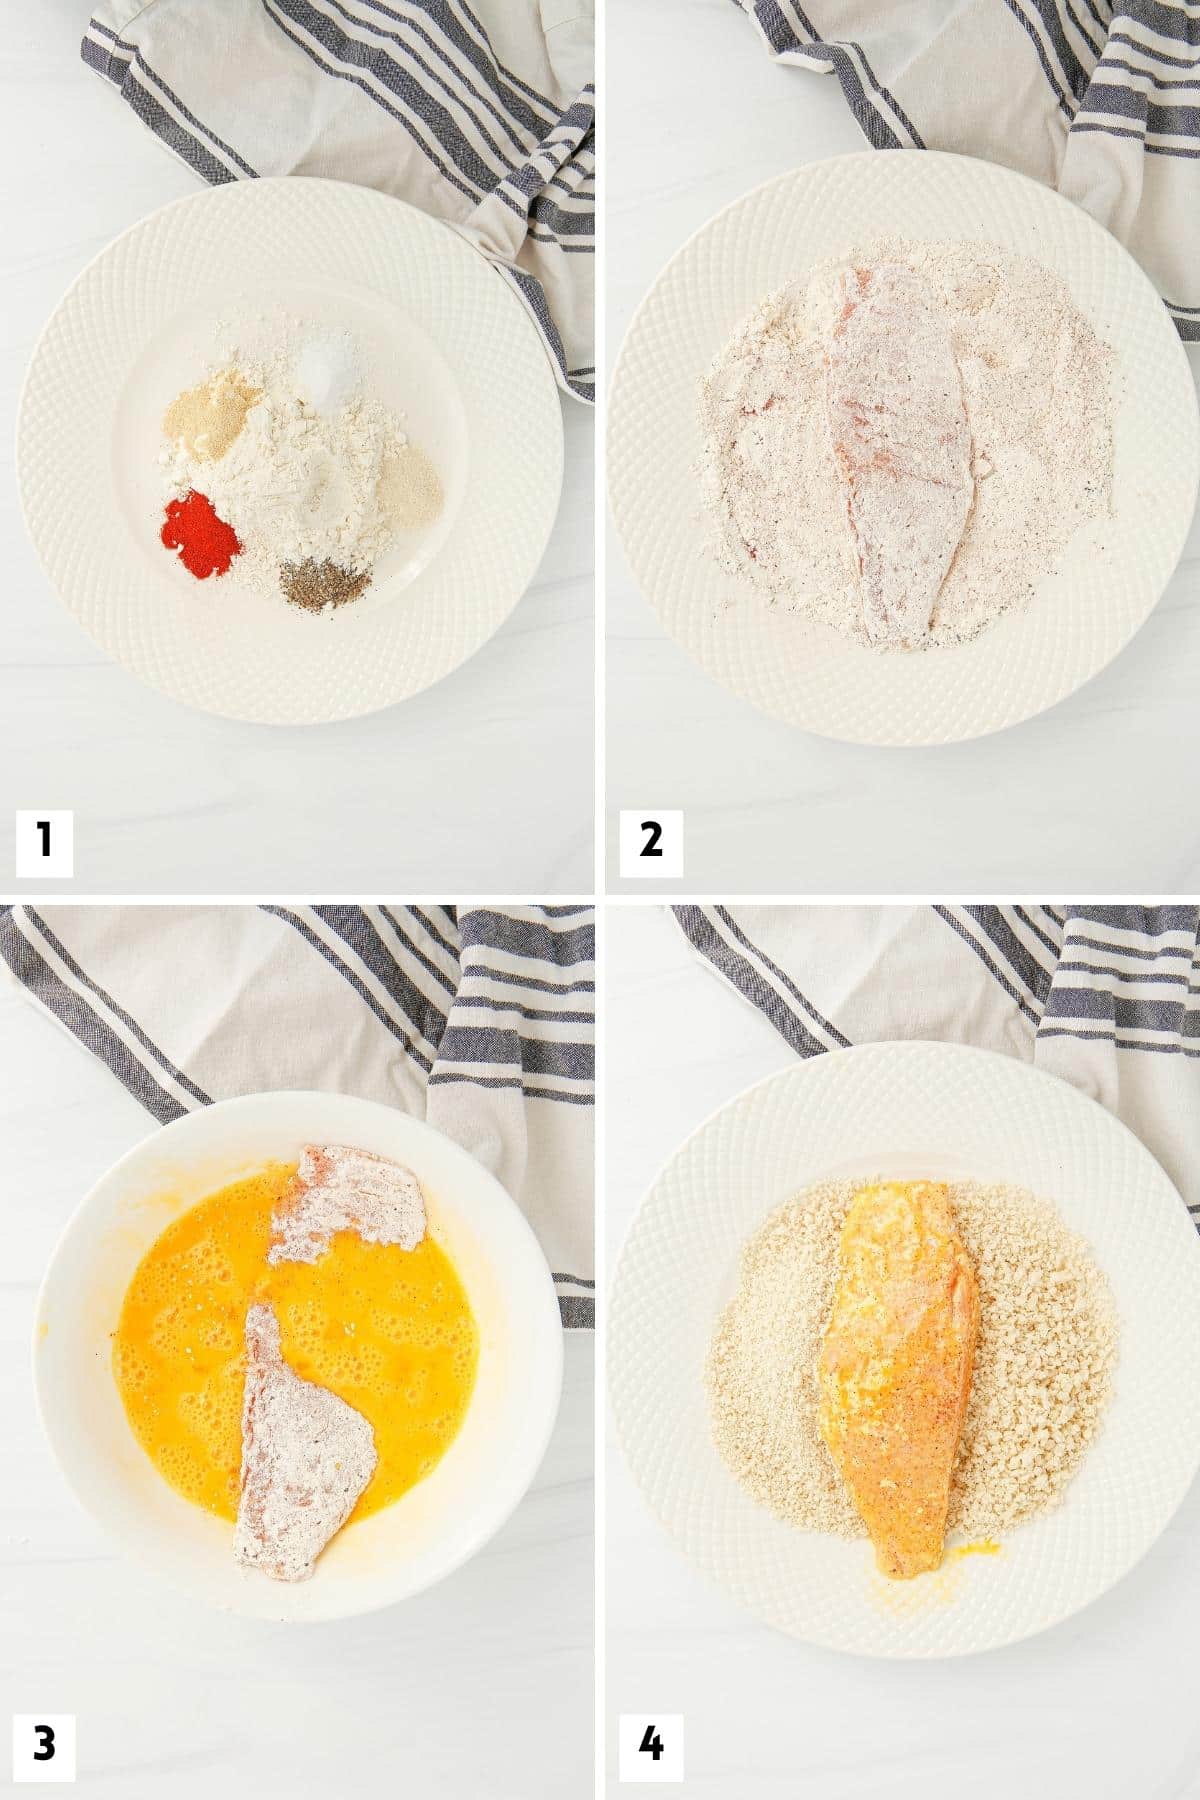 steps for making breaded fish in the air fryer.